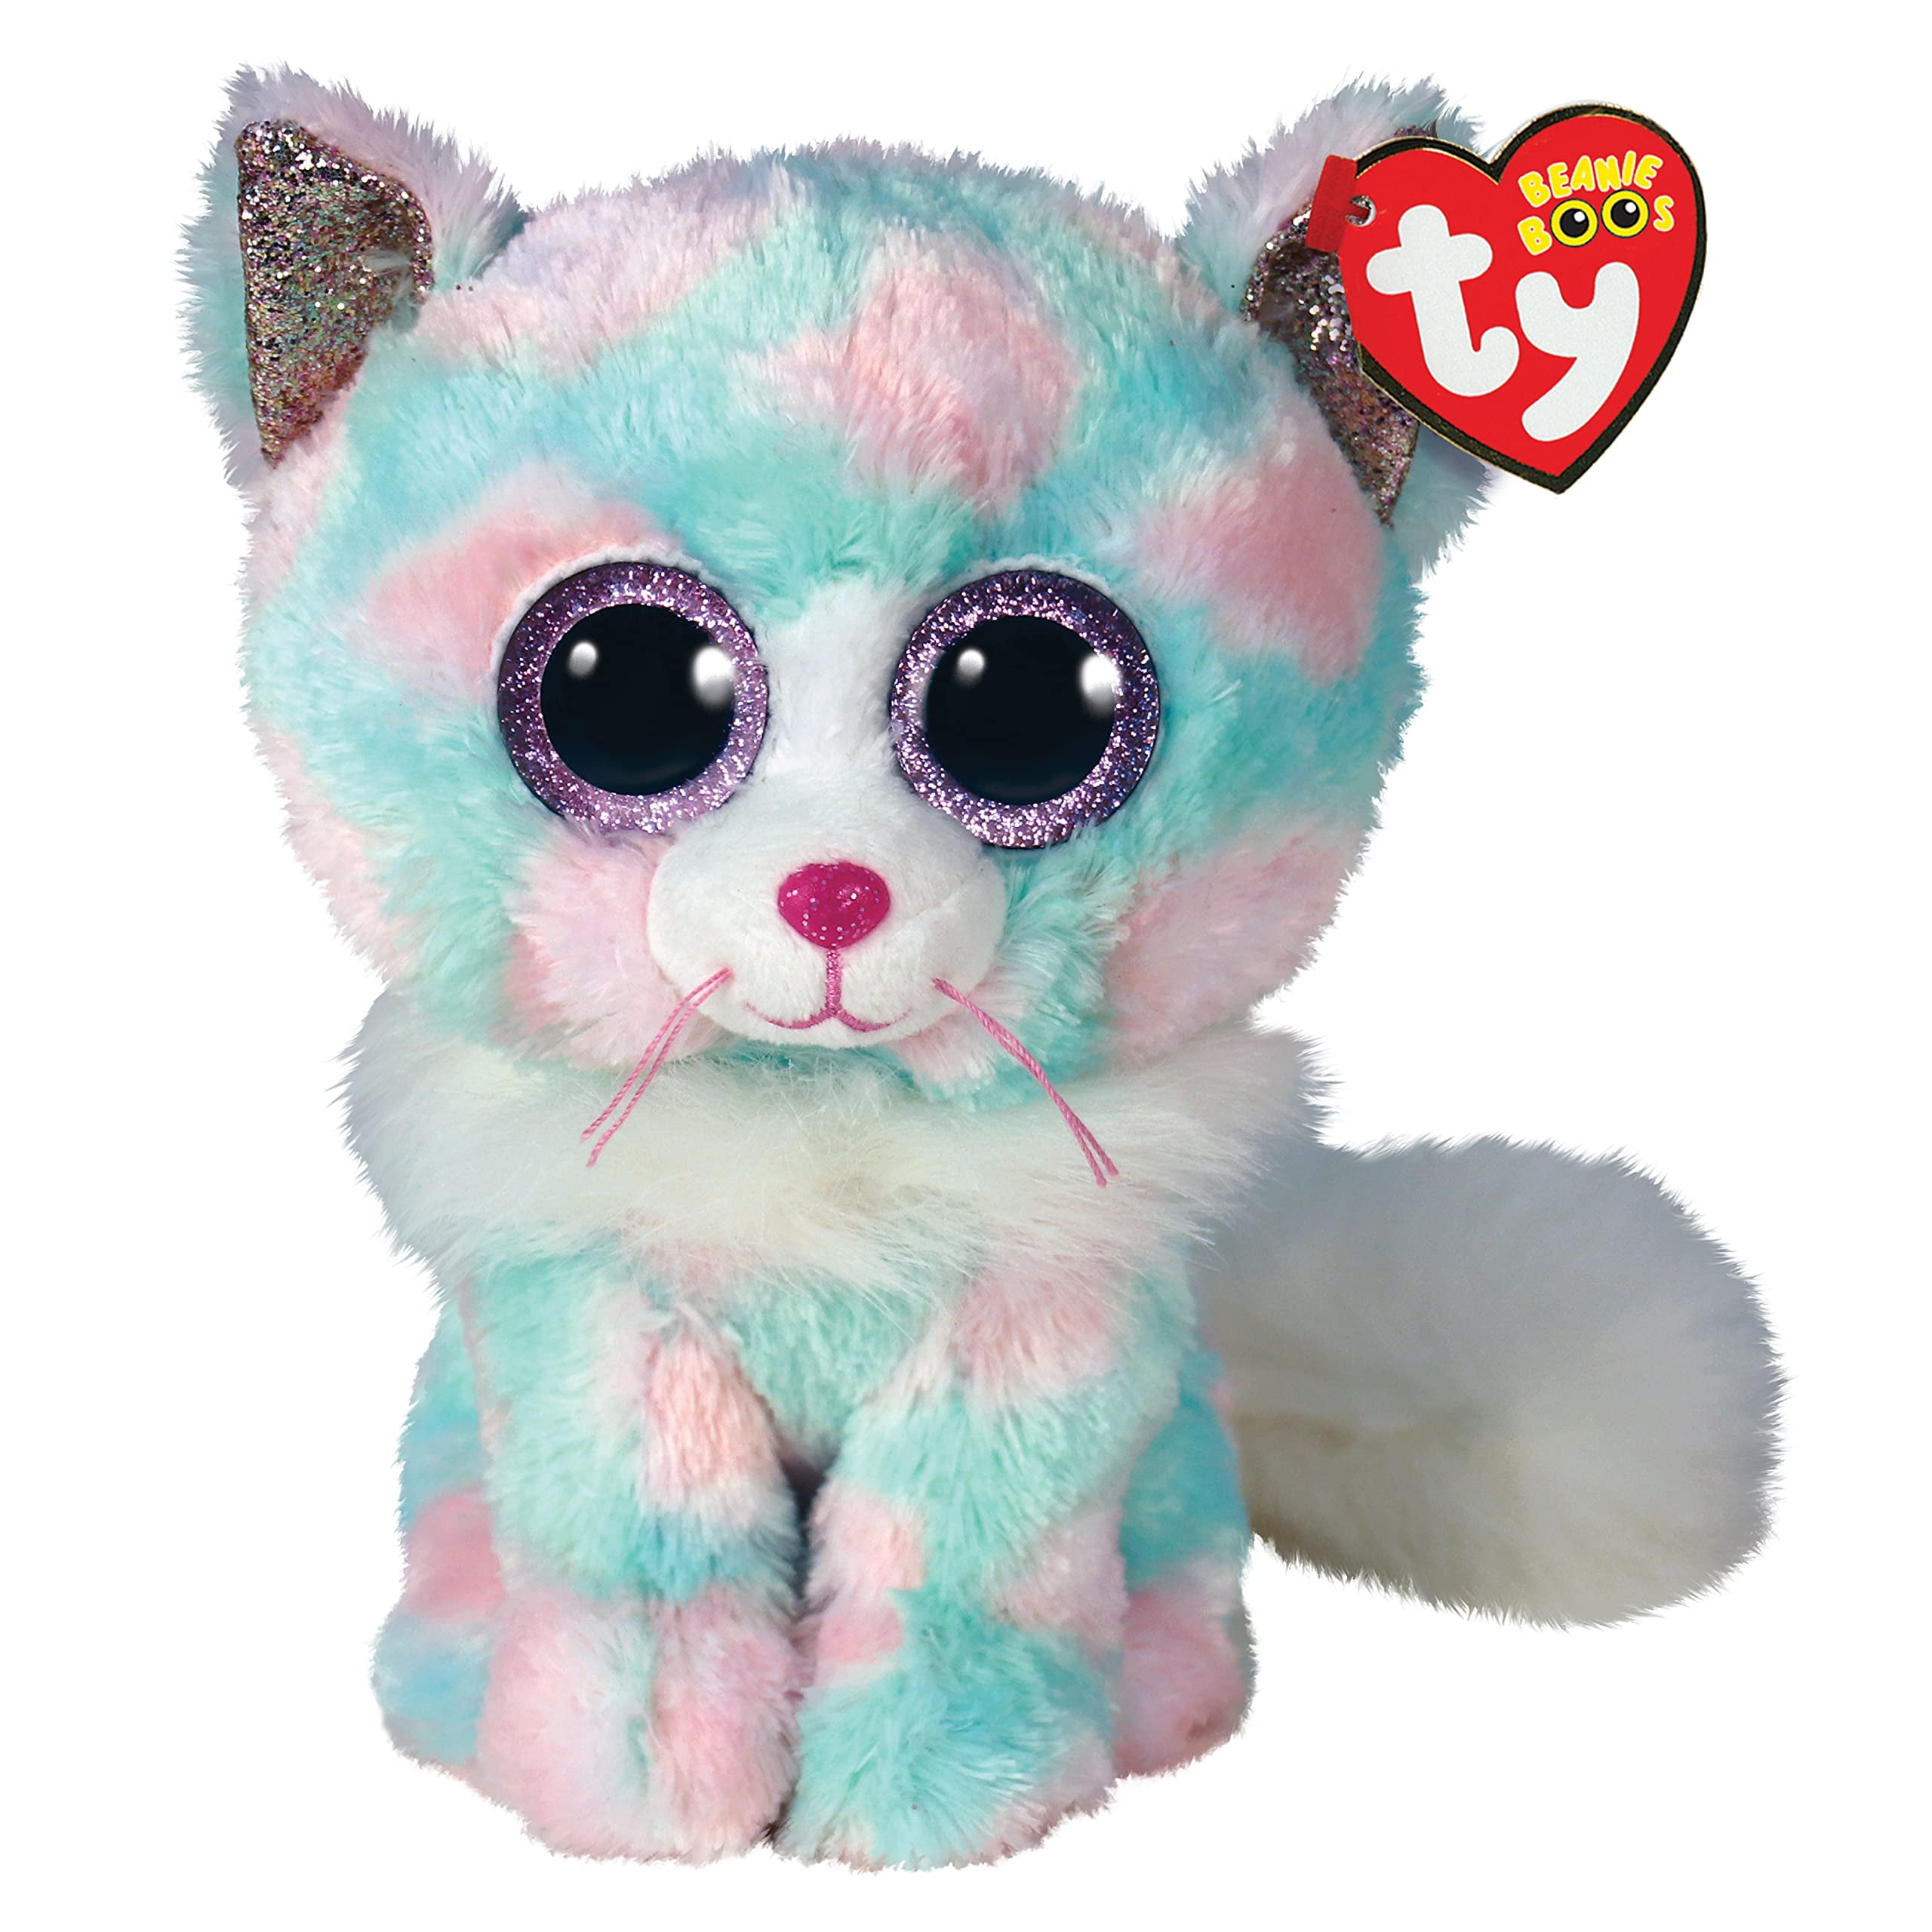 6 Inch Ty Beanie Boos ~ DAZZLE the Cat Justice Store Exclusive MWMT 